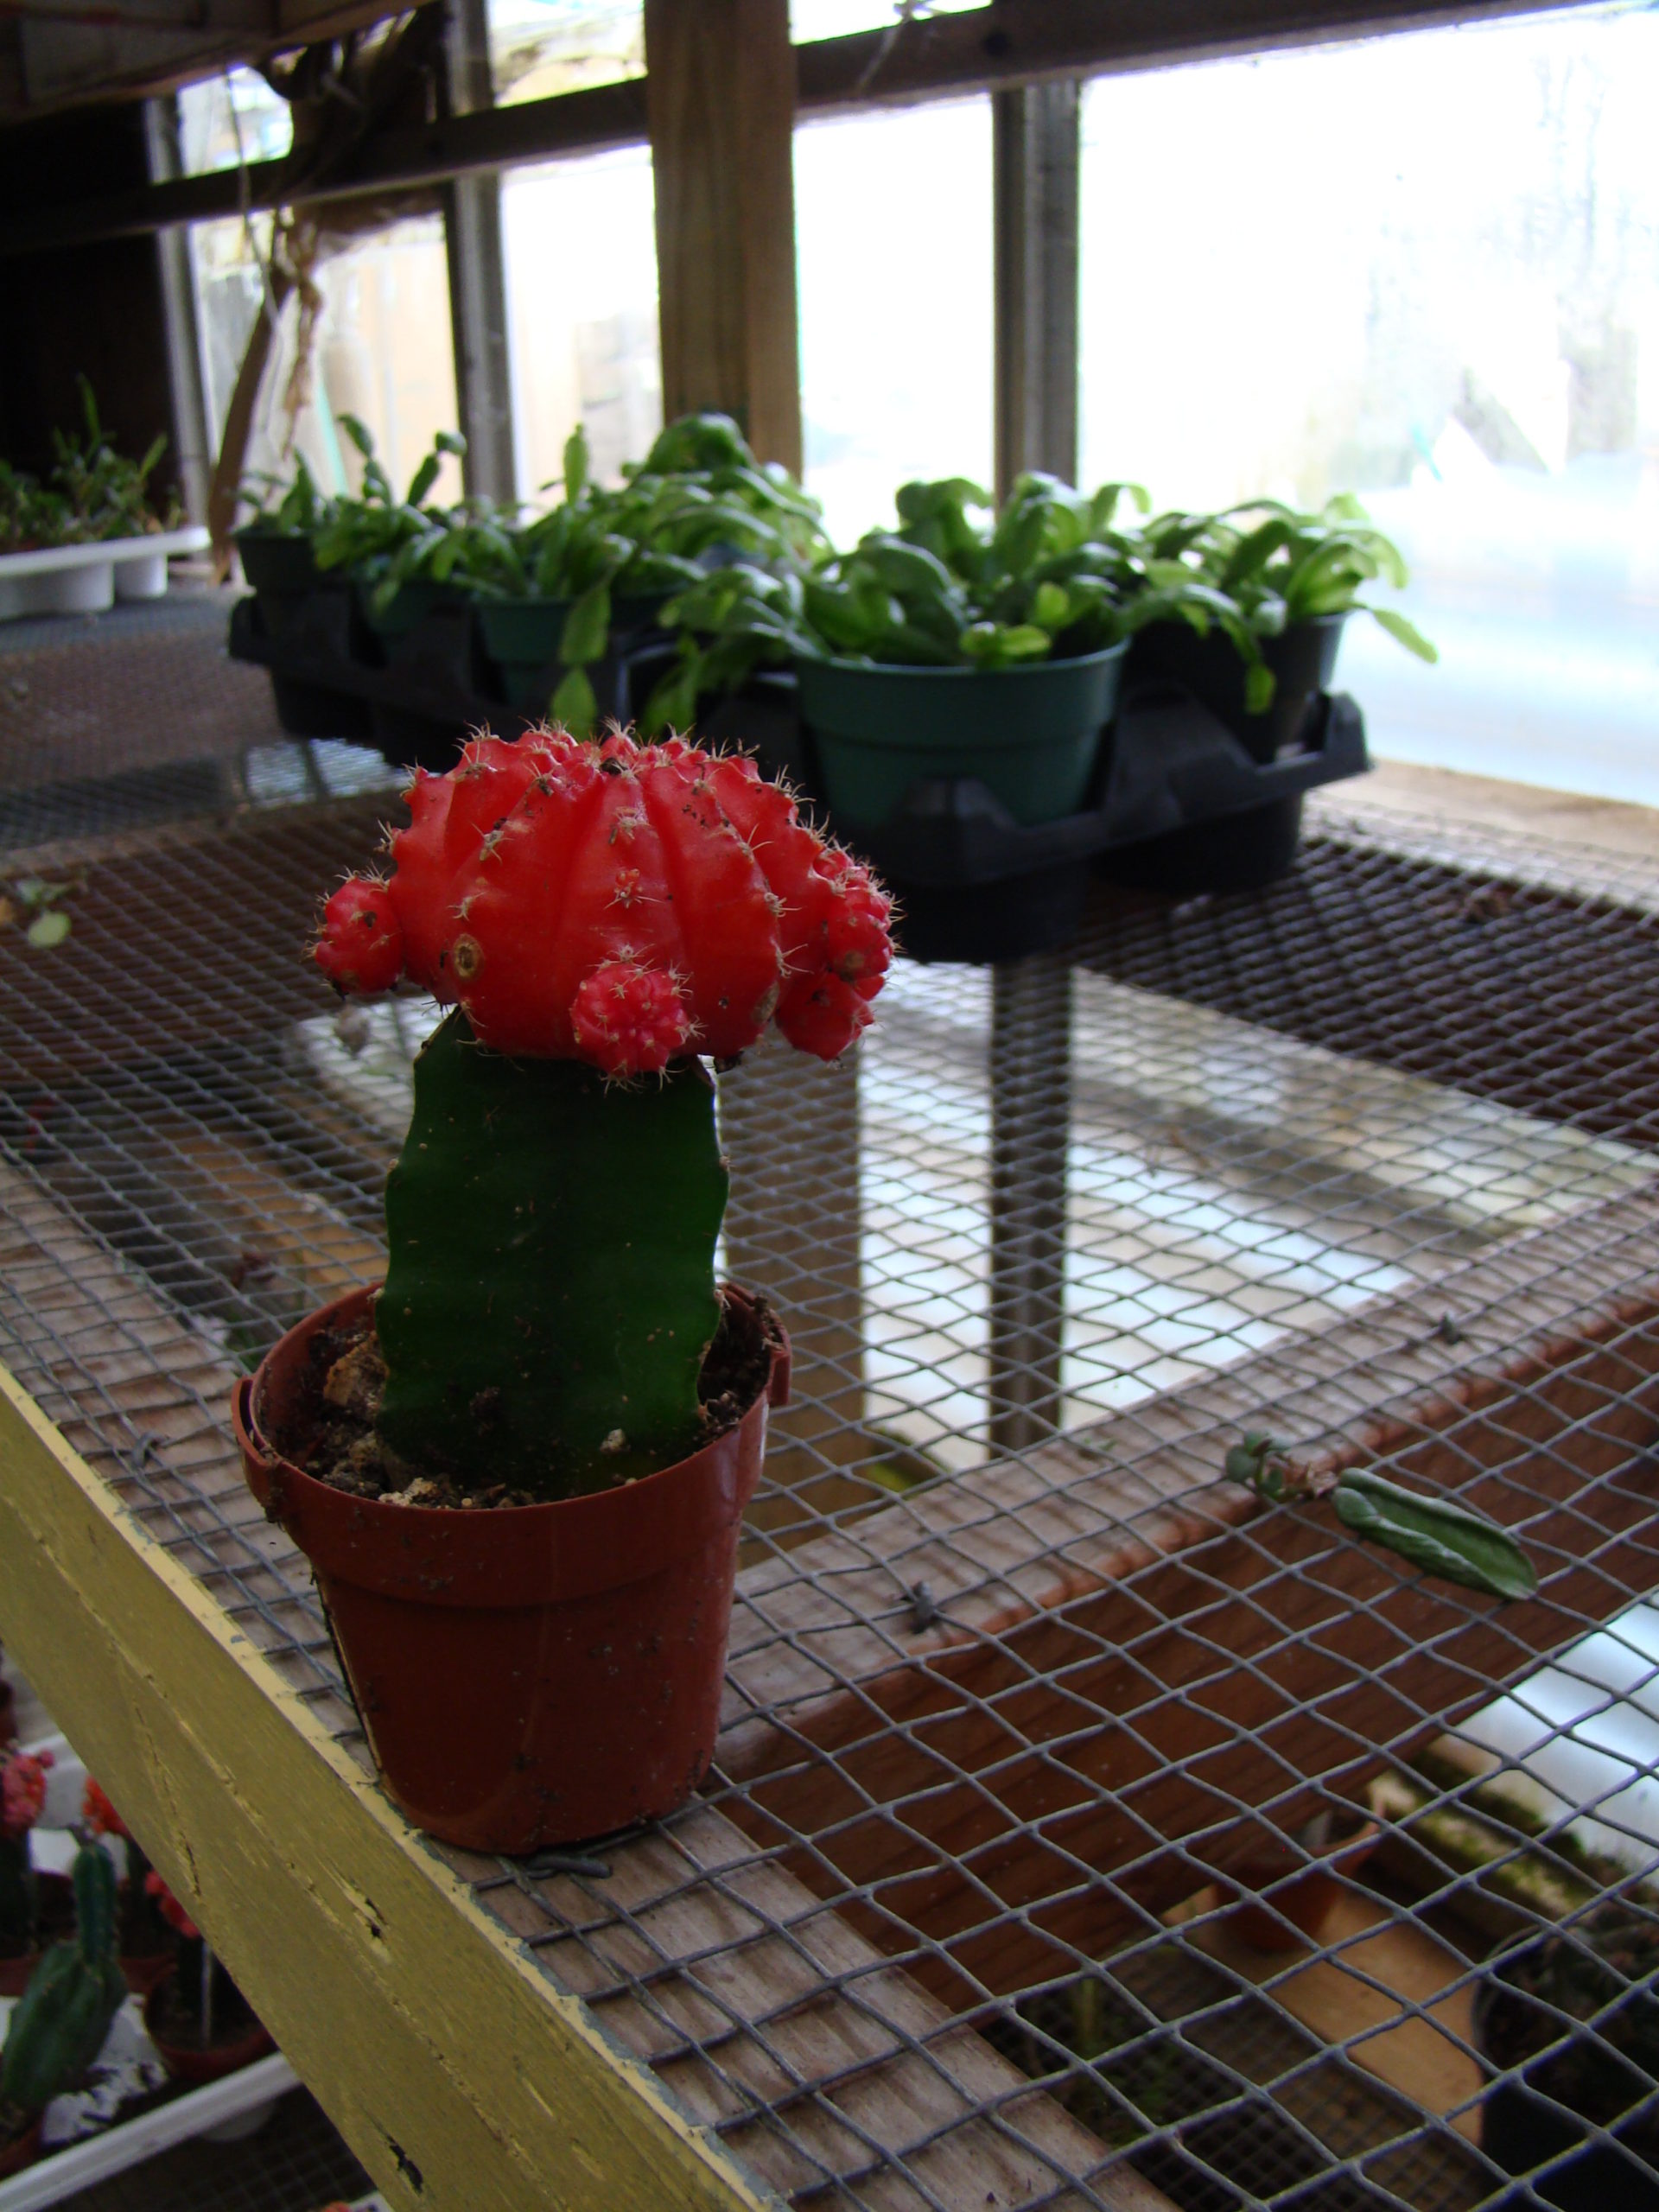 This is a grafted cactus where the colorful top is grafted to a different cactus below. These rarely live for long and can be a disappointment when give to children, giving them early black thumb phobias. It’s not their fault.